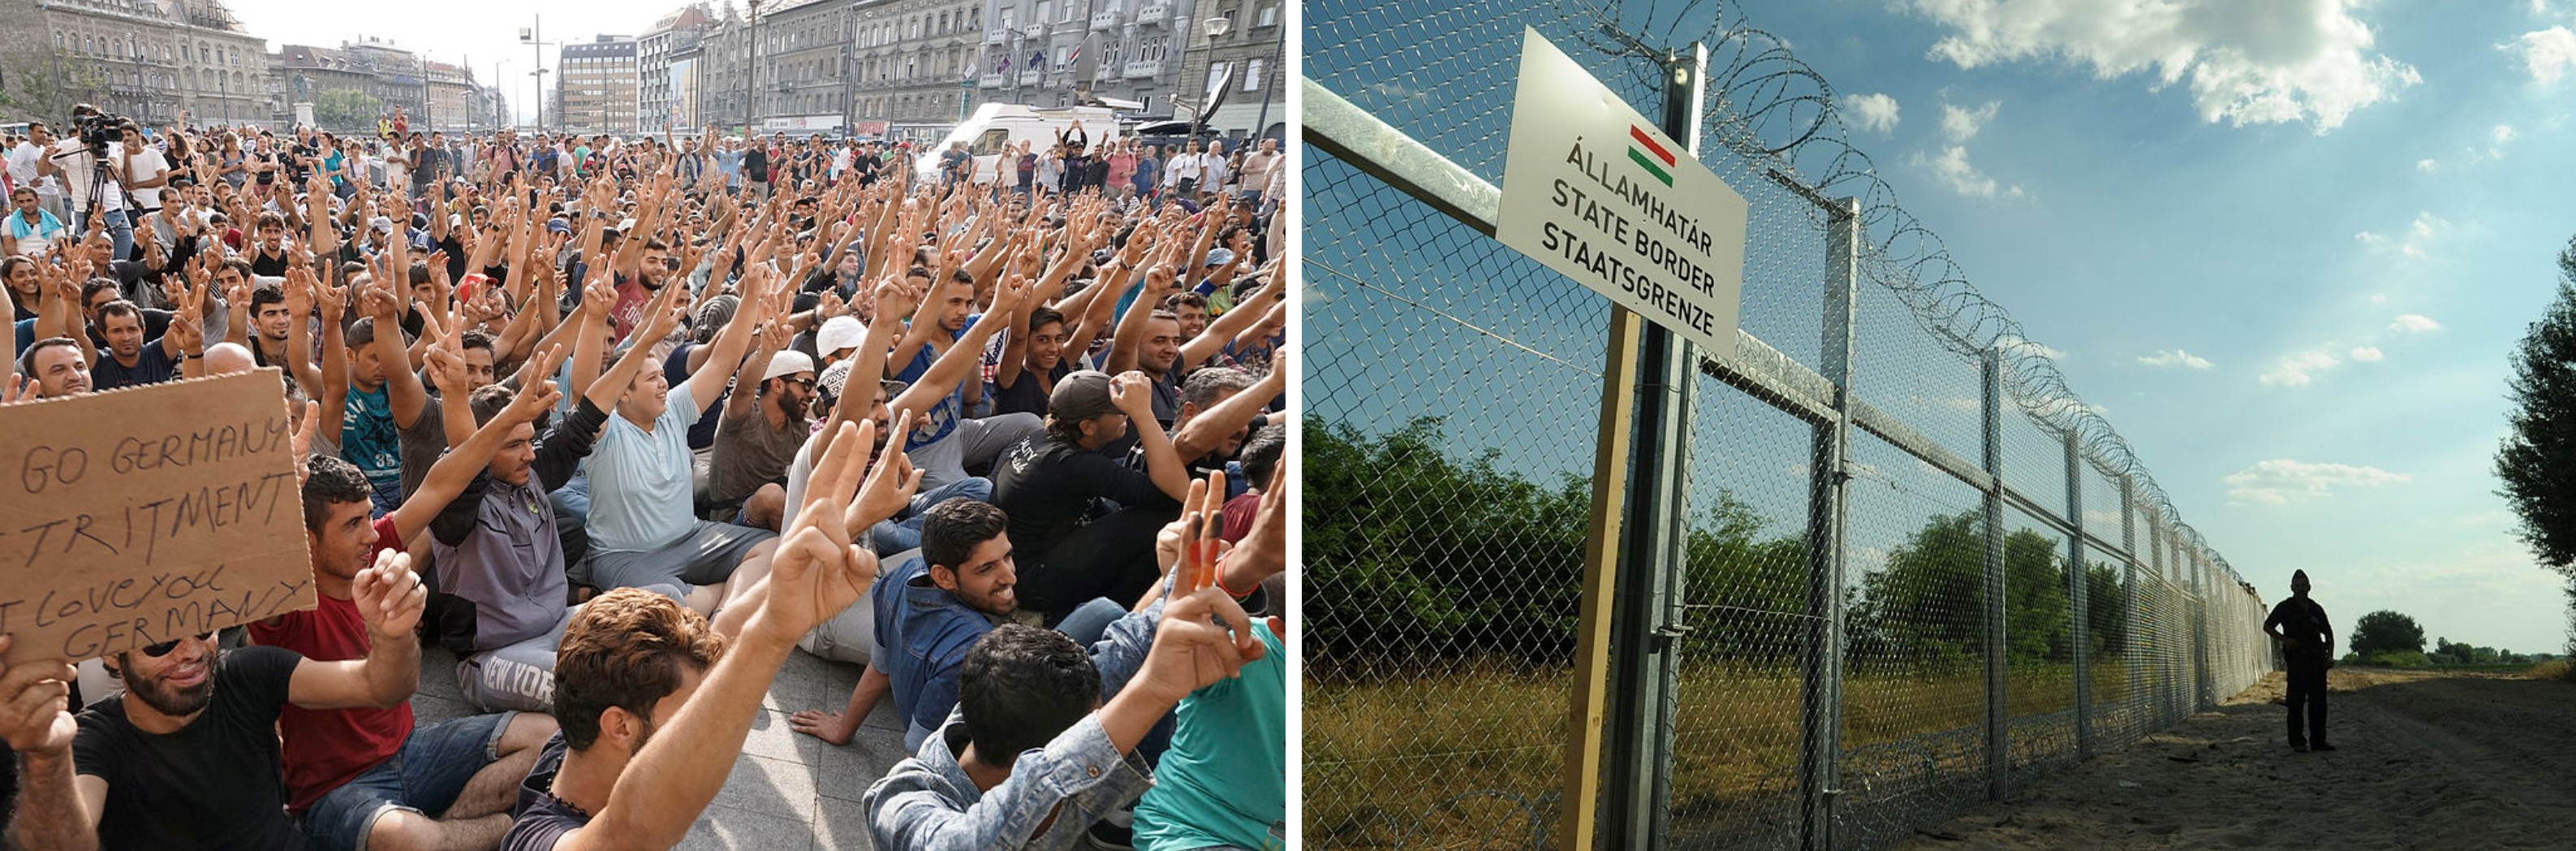 On the left, striking refugees at a railway station in Budapest. On the right, border fence between Hungary and Serbia.